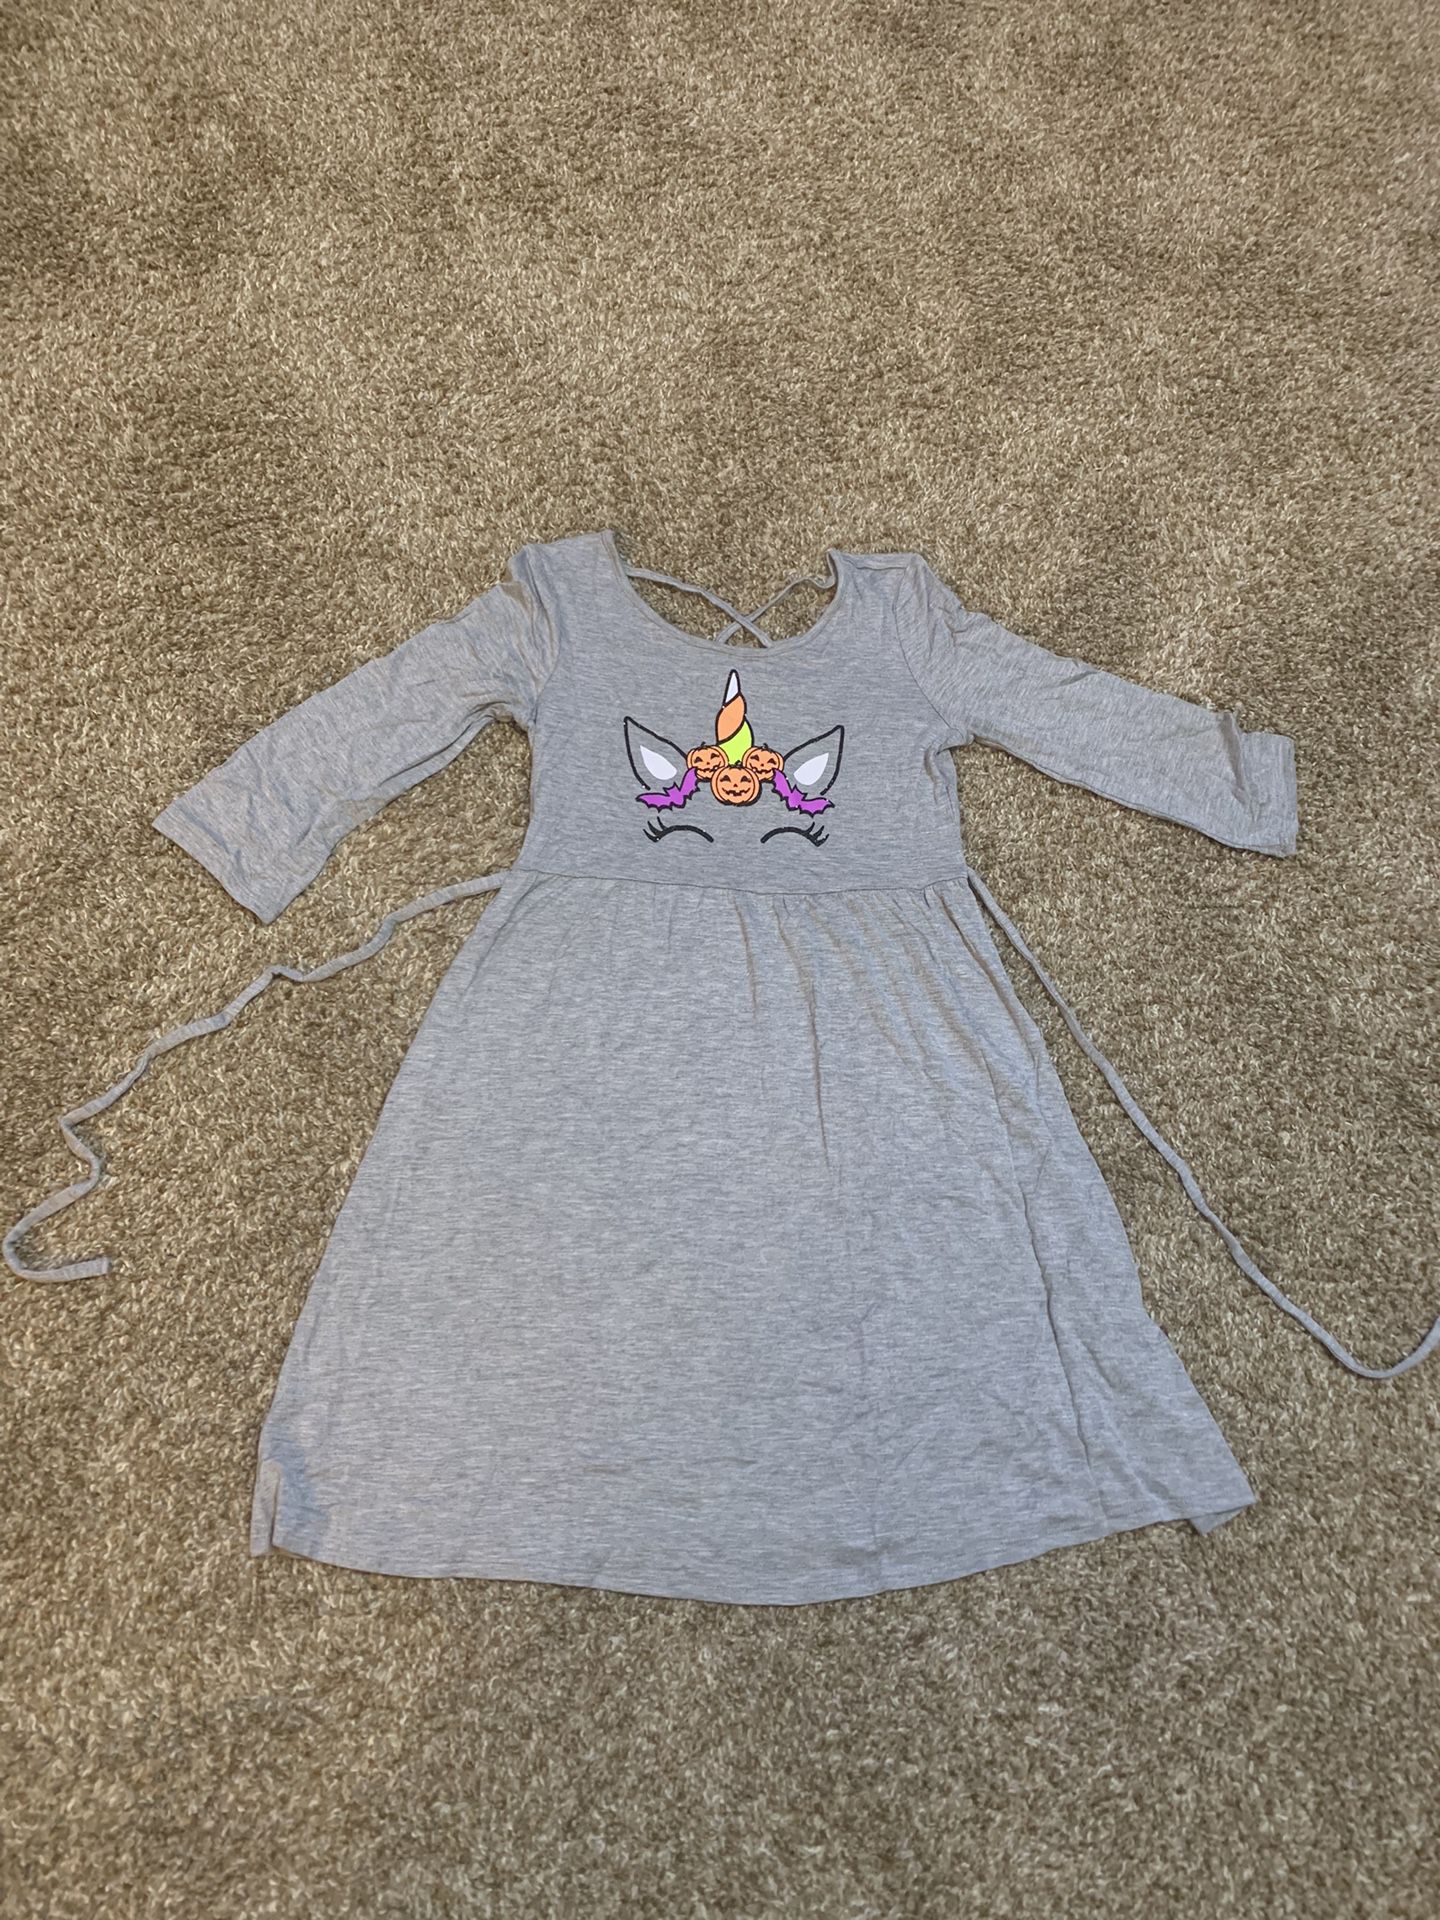 Girls Justice size 12 very cute dress